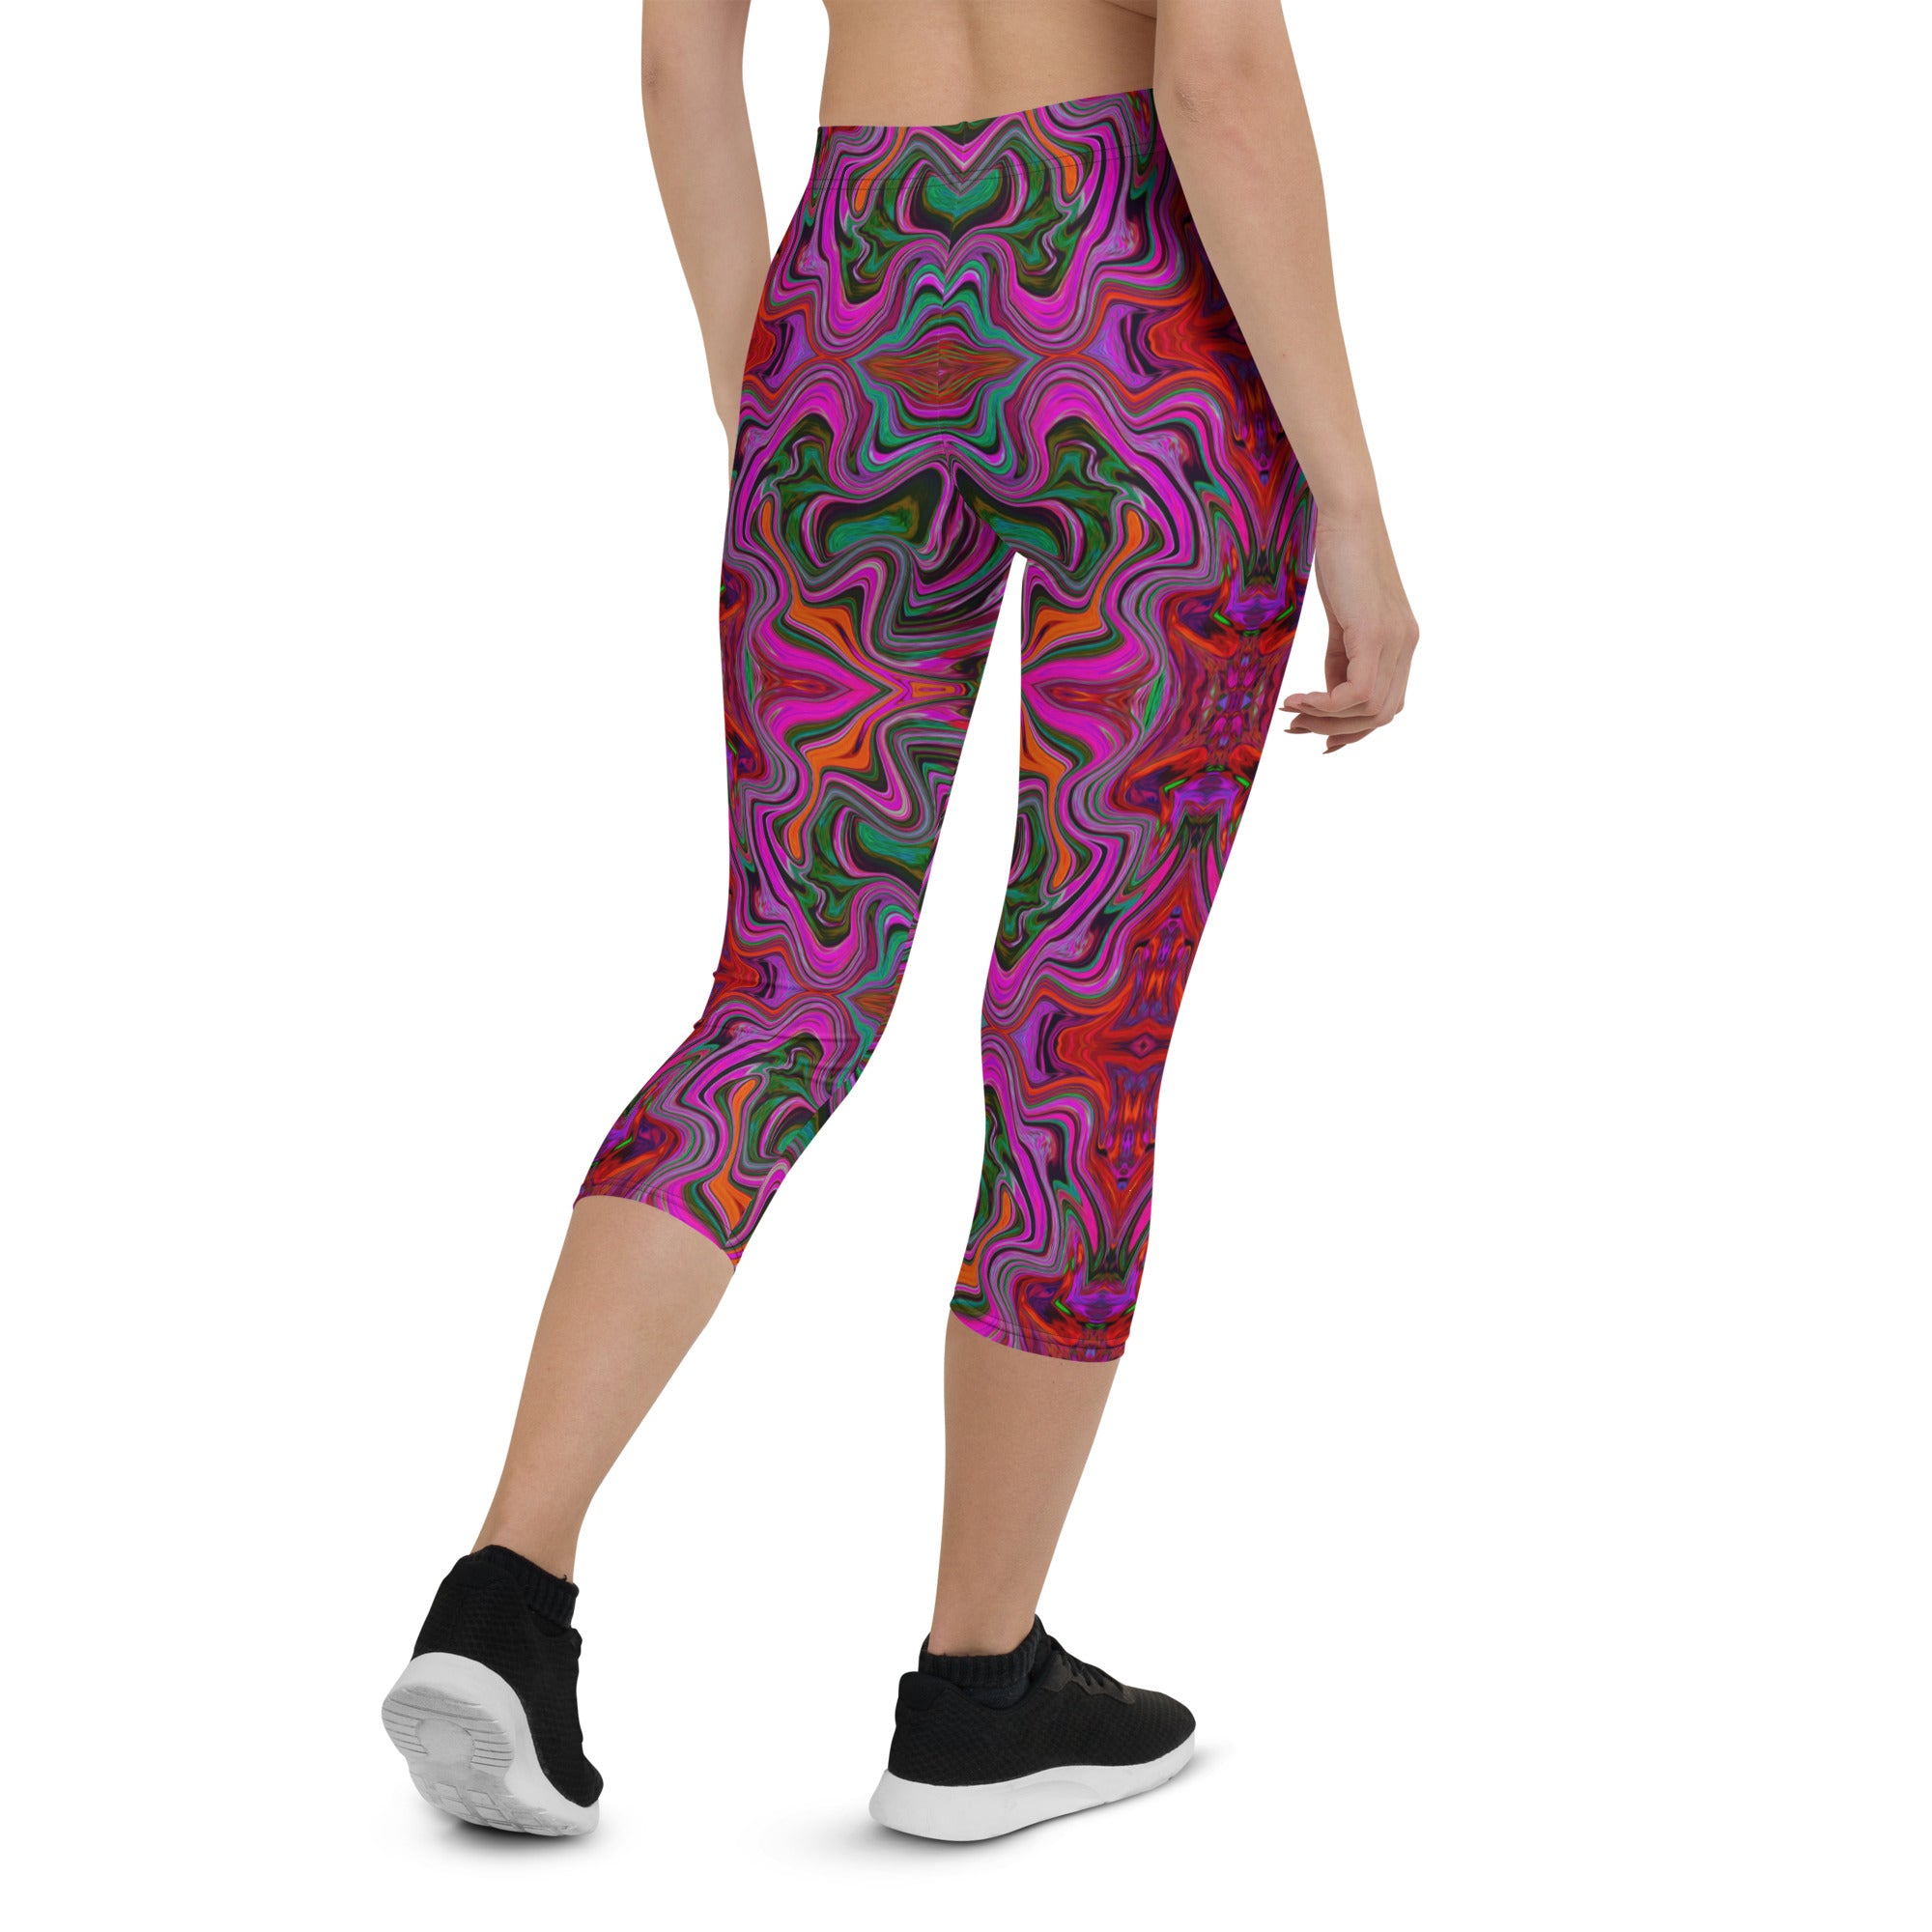 Capri Leggings for Women, Cool Trippy Magenta, Red and Green Wavy Pattern